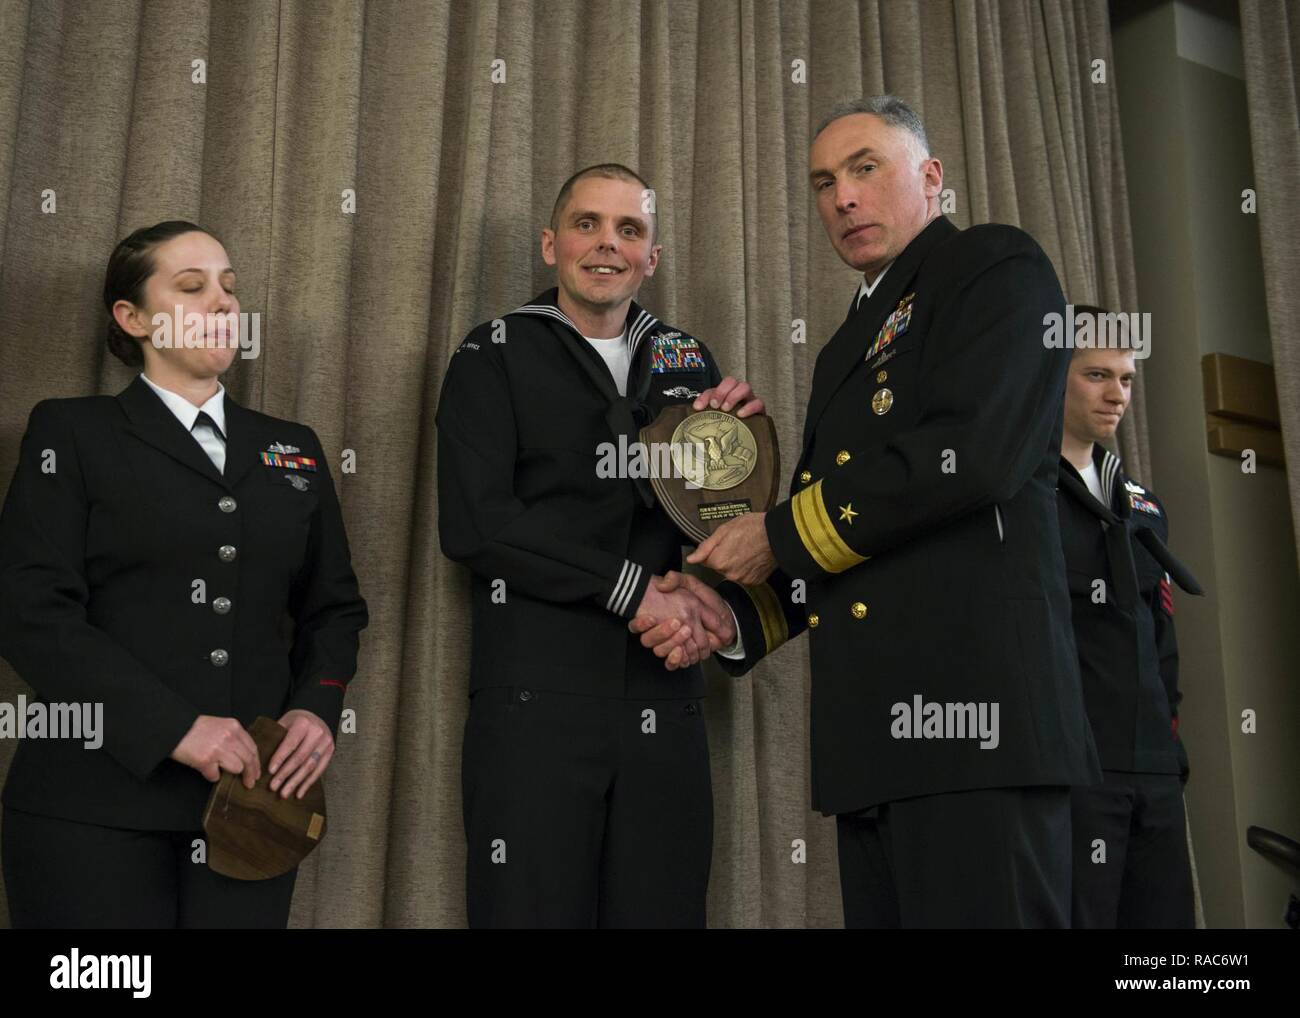 BANGOR, Wash. (Jan. 29, 2016) Rear Adm. John Tammen, commander, Submarine Group 9, congratulates Information Systems Technician 1st Class Nicholas Stenftenagel, from Jasper, Indiana, assigned to Priority Material Office (PMO) Bremerton, on becoming the 2016 Commander, Submarine Group Nine Shore Sailor of the Year. He will move on to participate in the Commander Submarine Force, U.S. Pacific Fleet (SUBPAC) Sailor of the Year competition, which will kick off next month in San Diego. Stock Photo